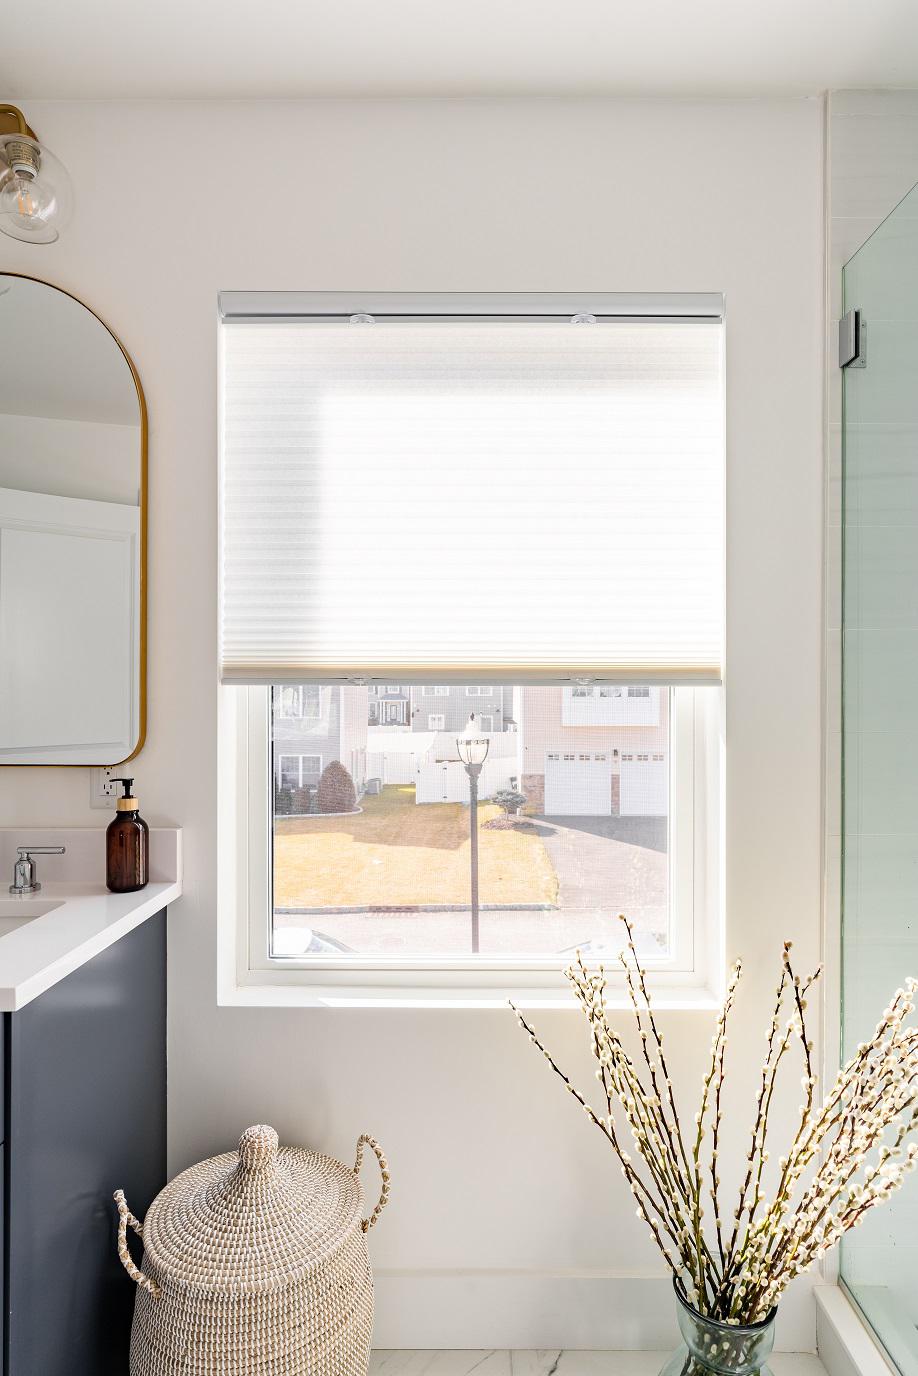 Embrace the luxurious functionality of our Signature Cellular Shades, providing insulation and energy efficiency for a comfortable bathroom environment. These stylish window coverings bring a touch of elegance and privacy to your sanctuary, transforming it into a tranquil retreat.